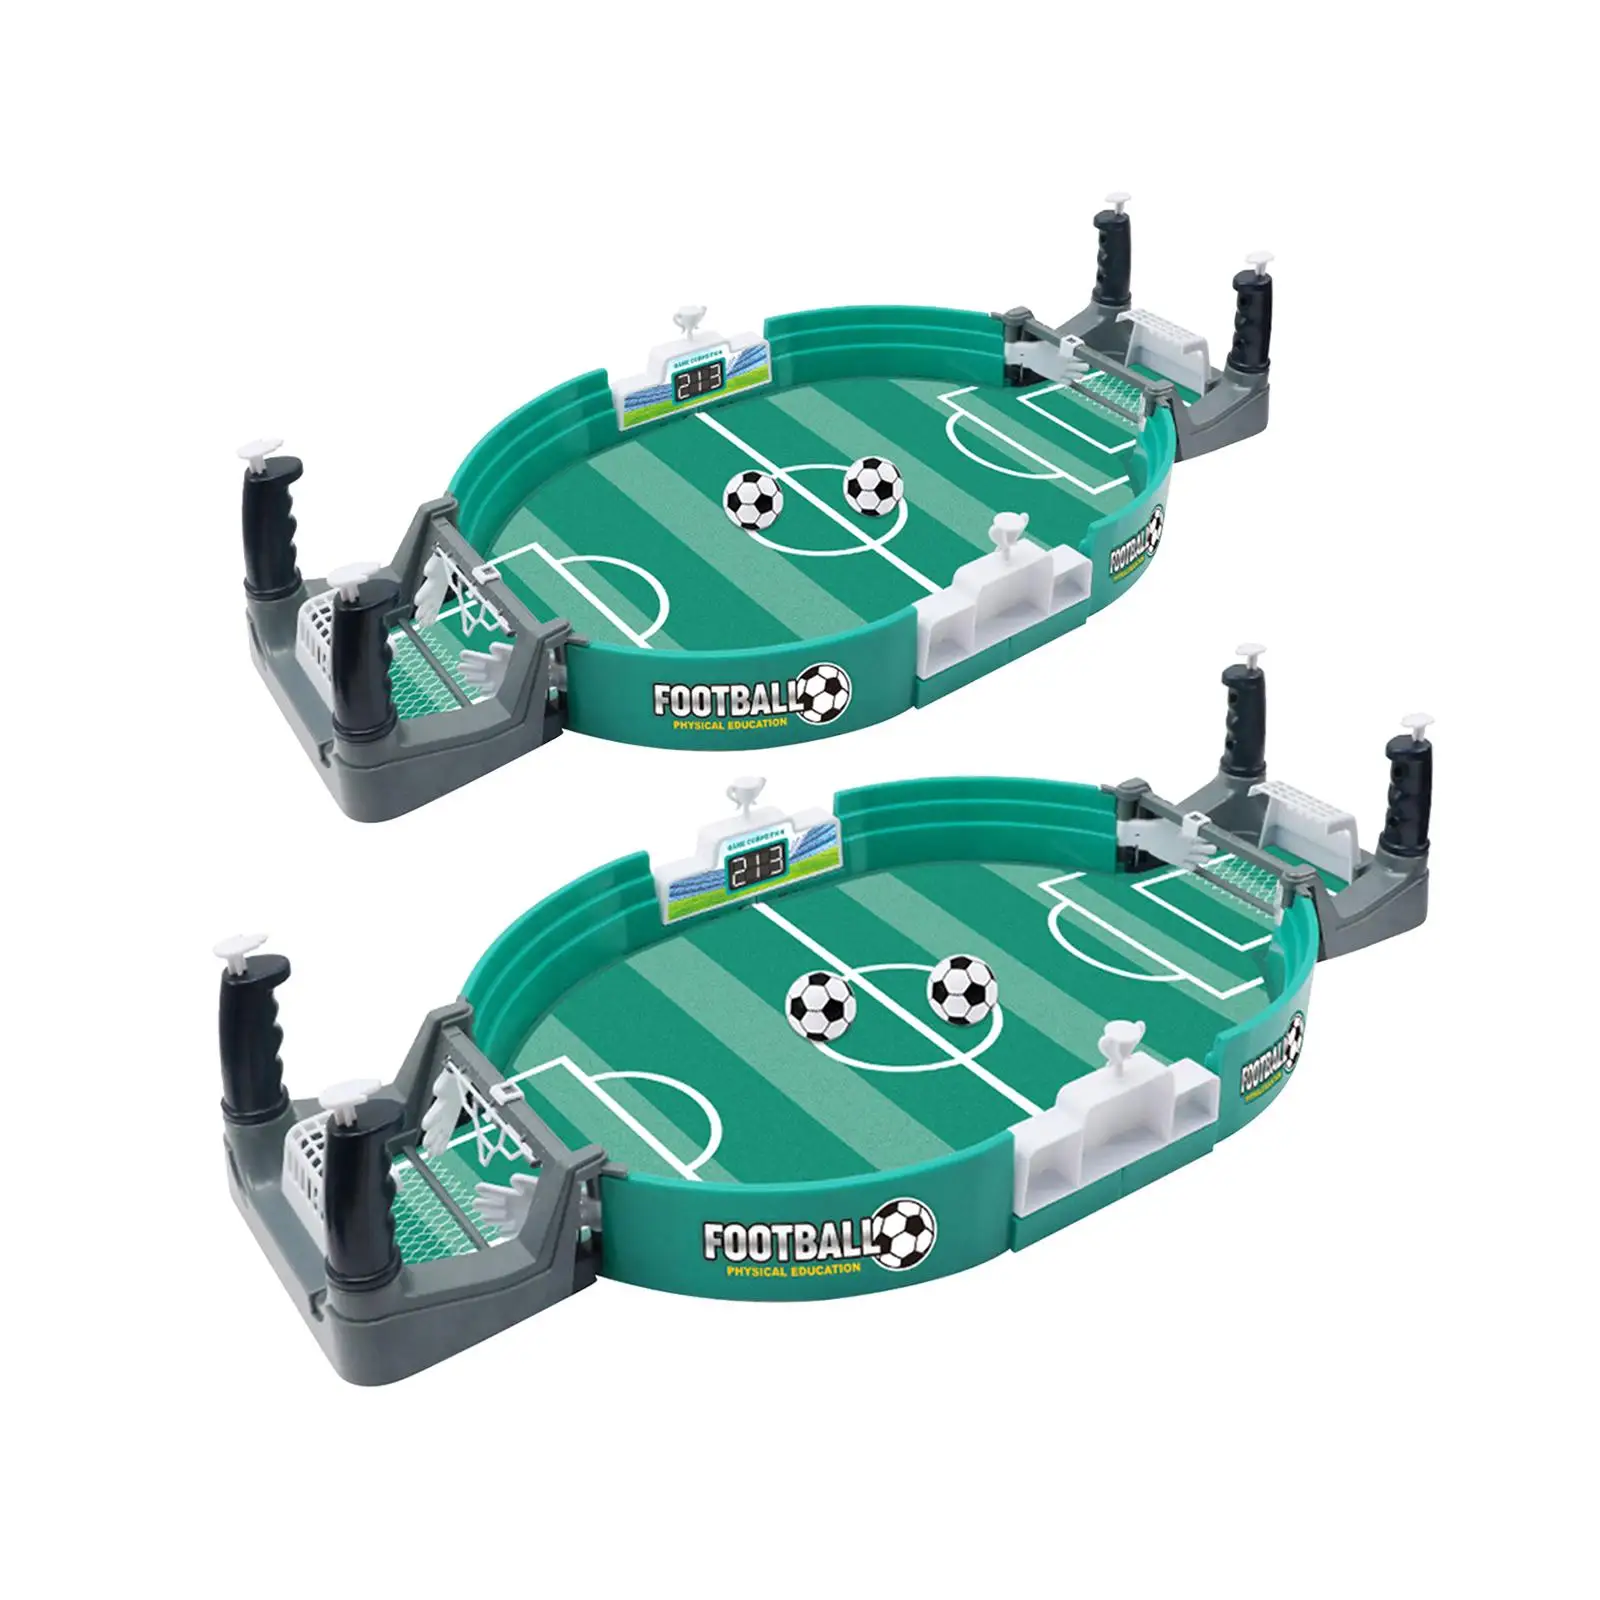 Football Board Sport Game Mini Tabletop Football for Family Game Entertainment Party